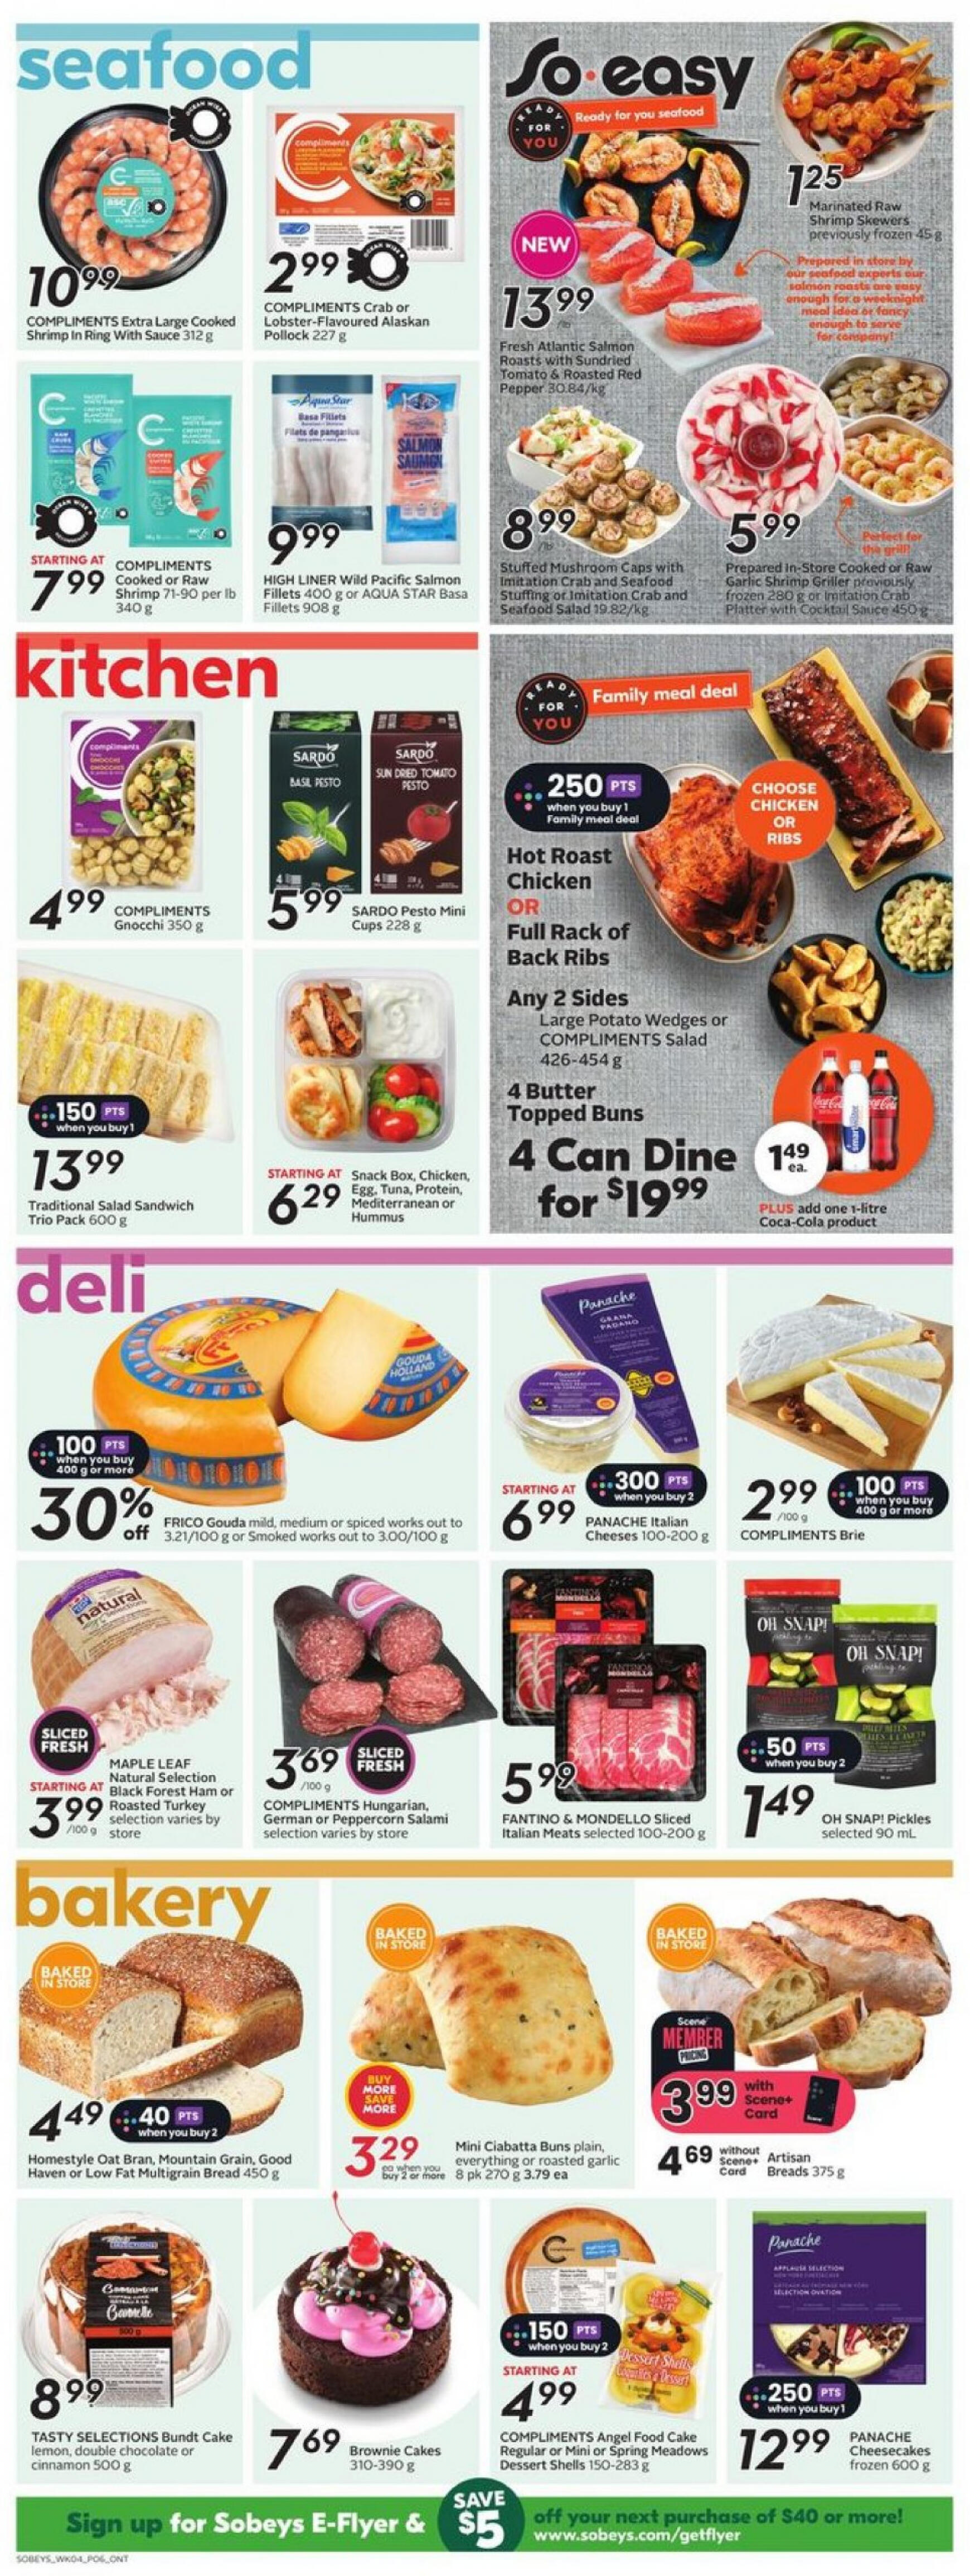 sobeys - Sobeys - Weekly Flyer - Ontario flyer current 23.05. - 29.05. - page: 12